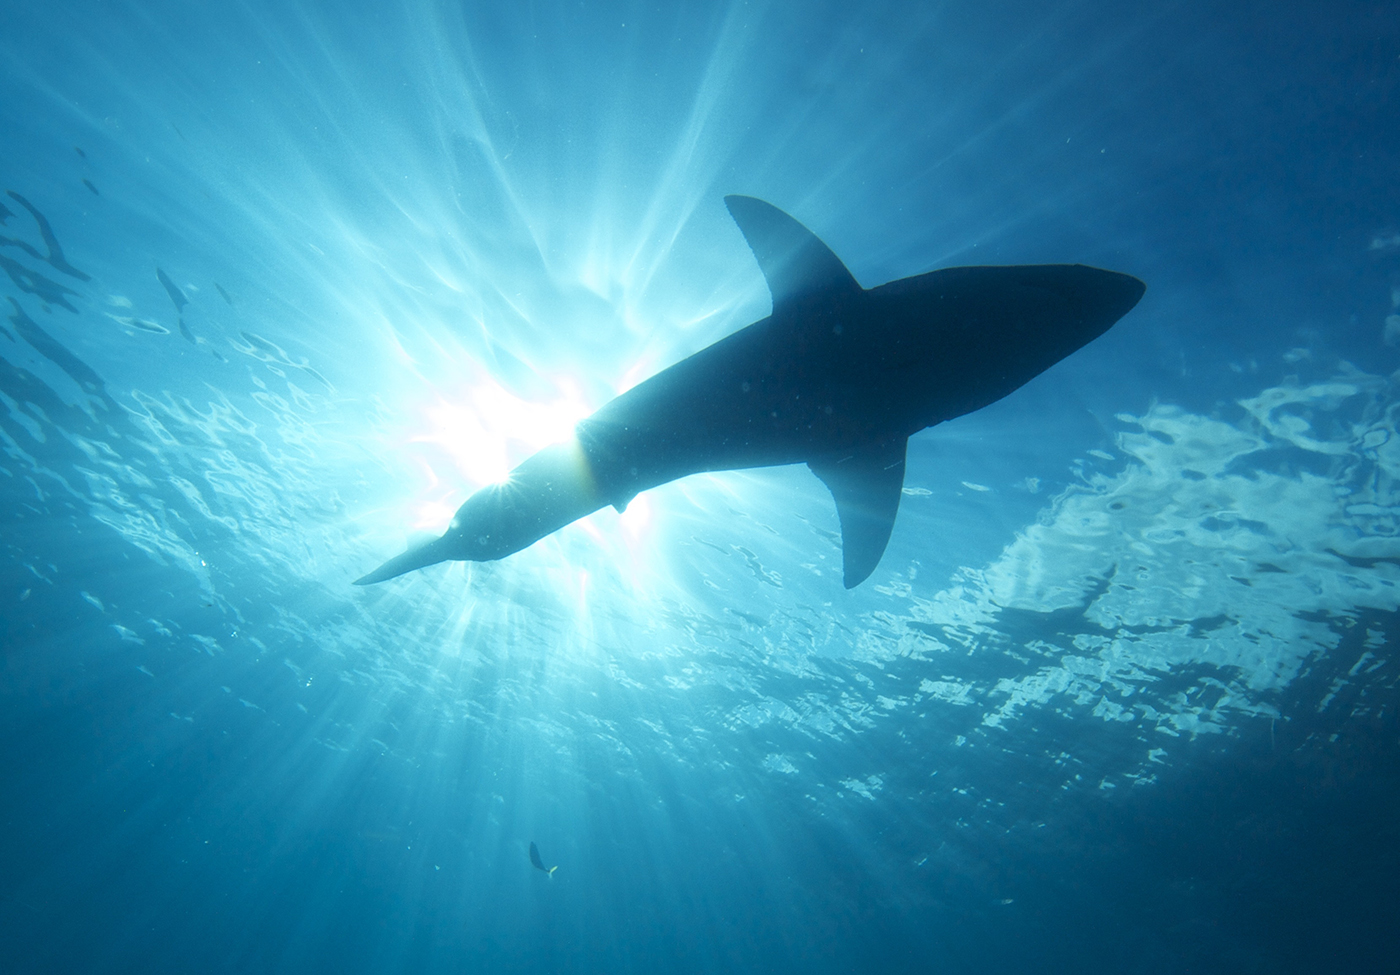 A great white shark swims above, close to the surface of the water. Image Credit: Elias Levy / CC BY (https://creativecommons.org/licenses/by/2.0).